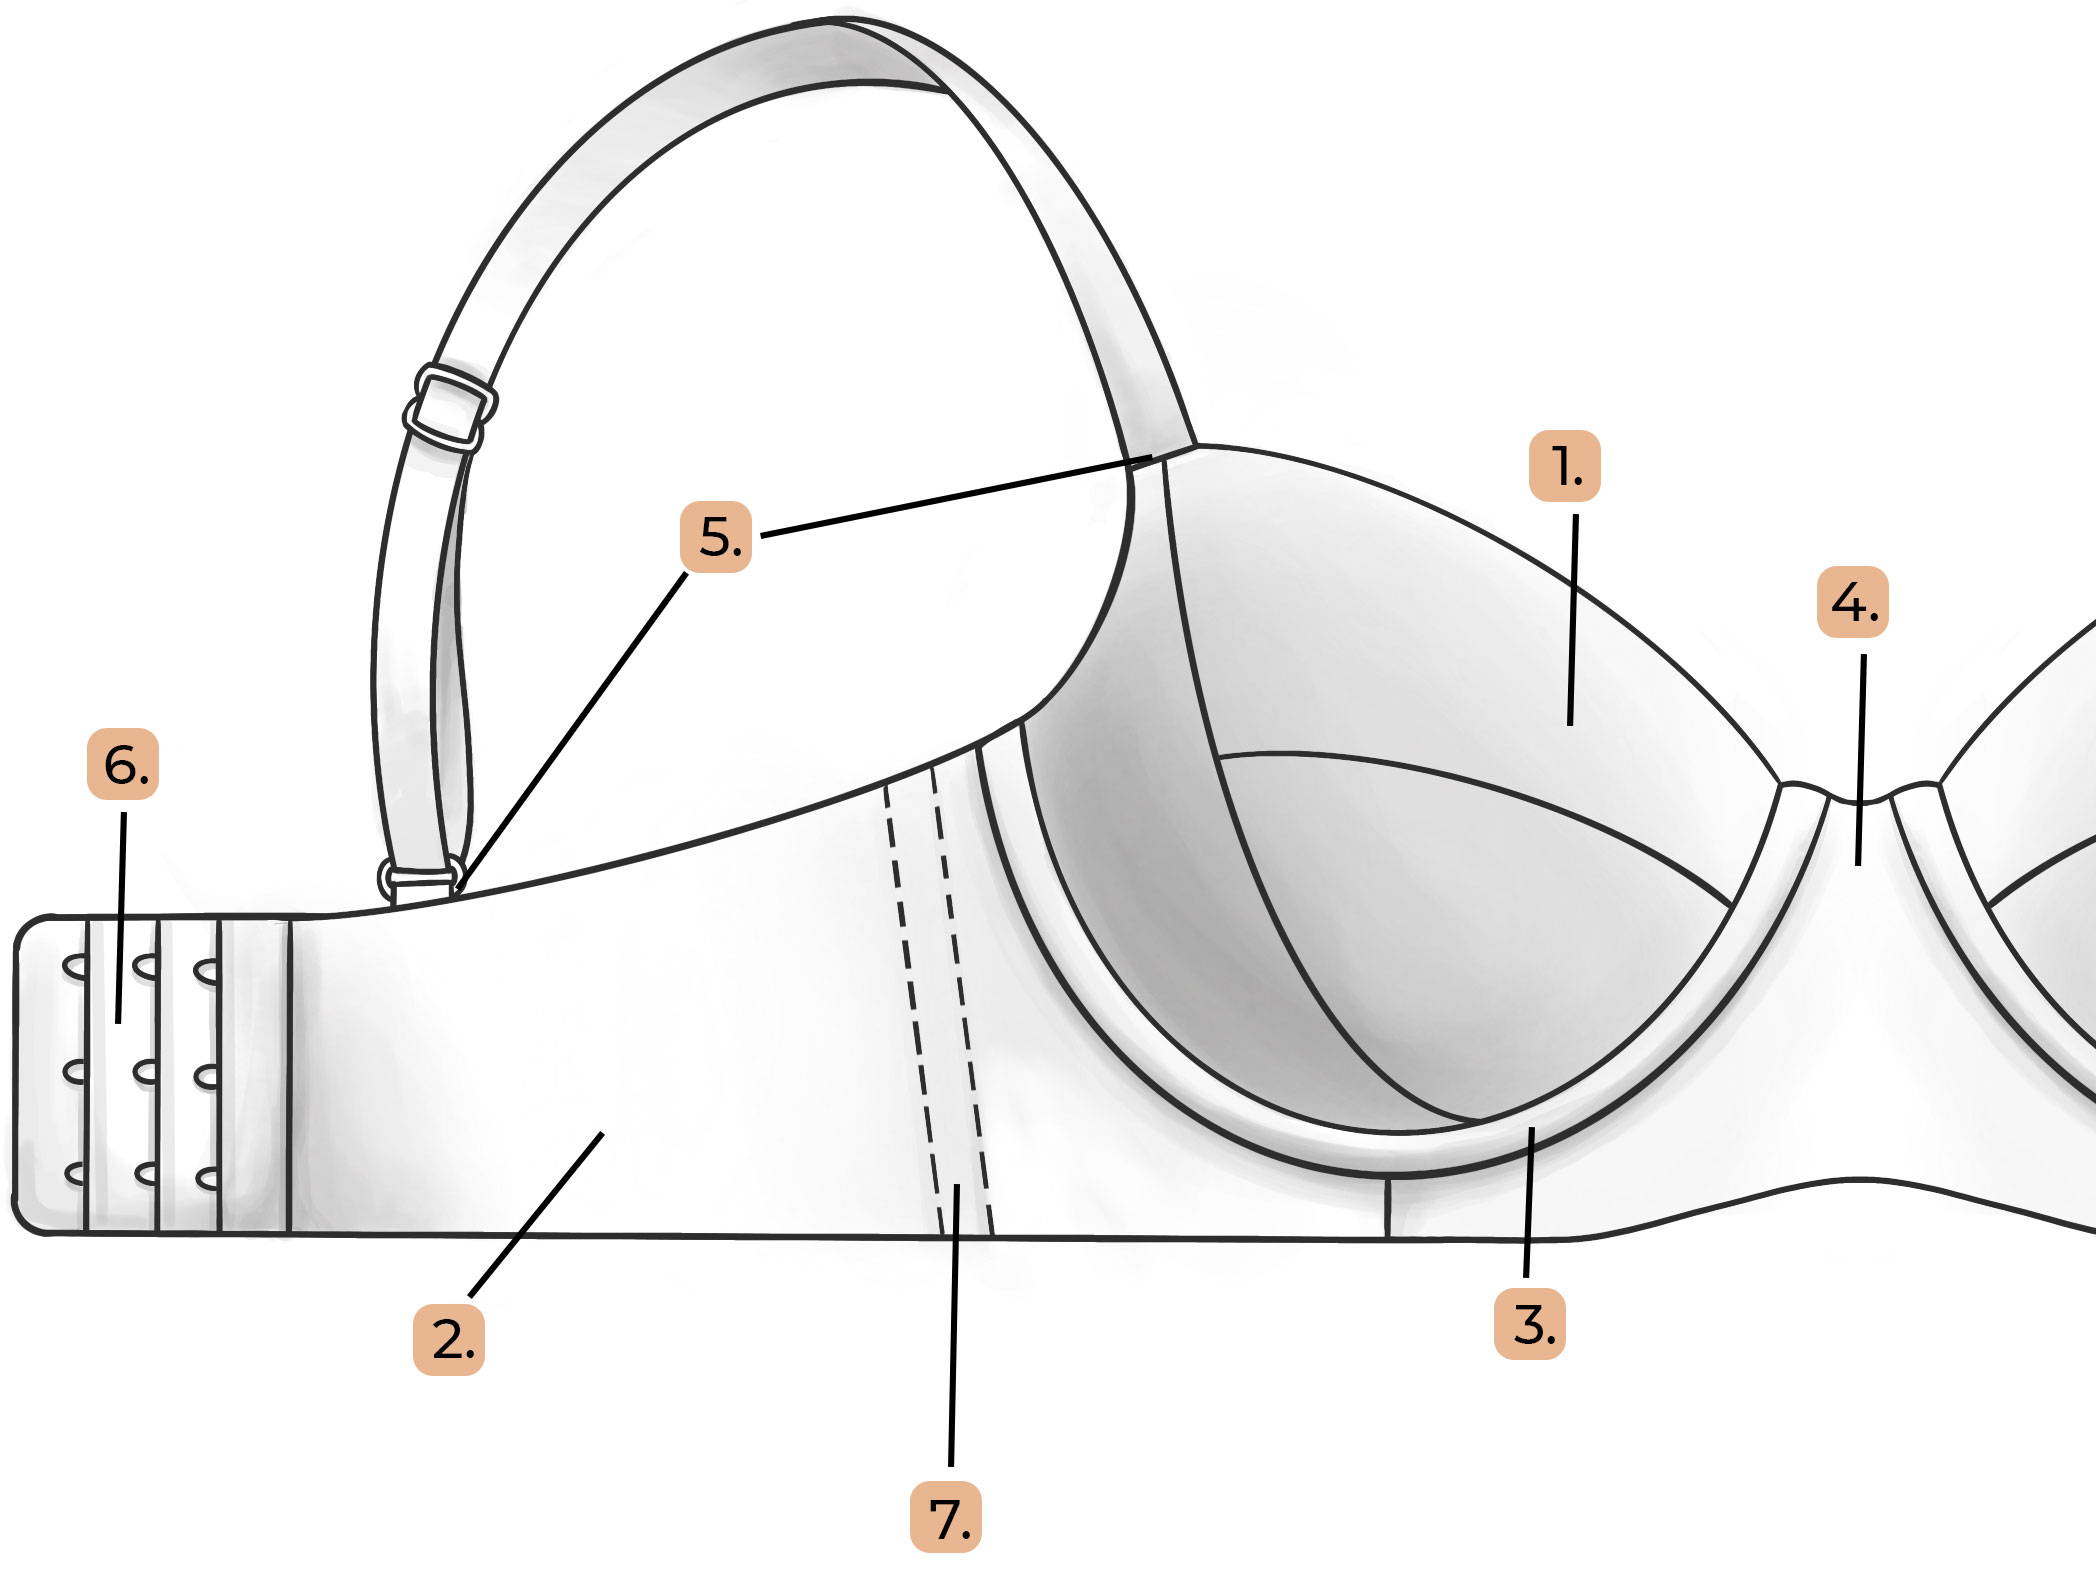 An Image highlighting parts of a bra